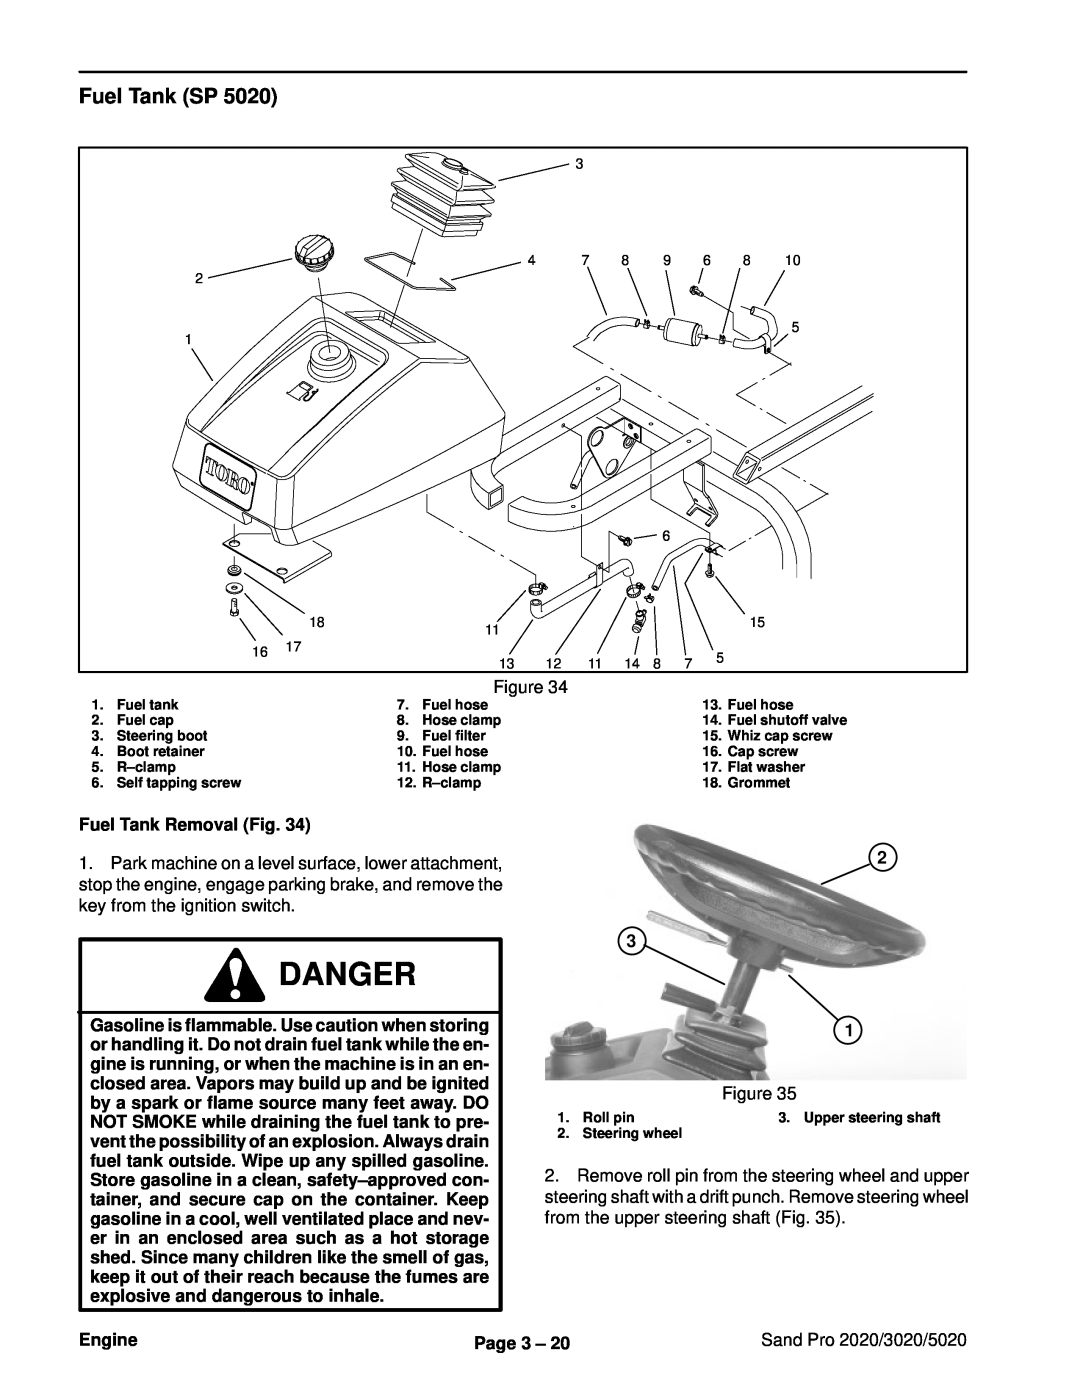 Toro service manual Fuel Tank SP, Danger, Fuel Tank Removal Fig, Engine, Page 3, Sand Pro 2020/3020/5020 